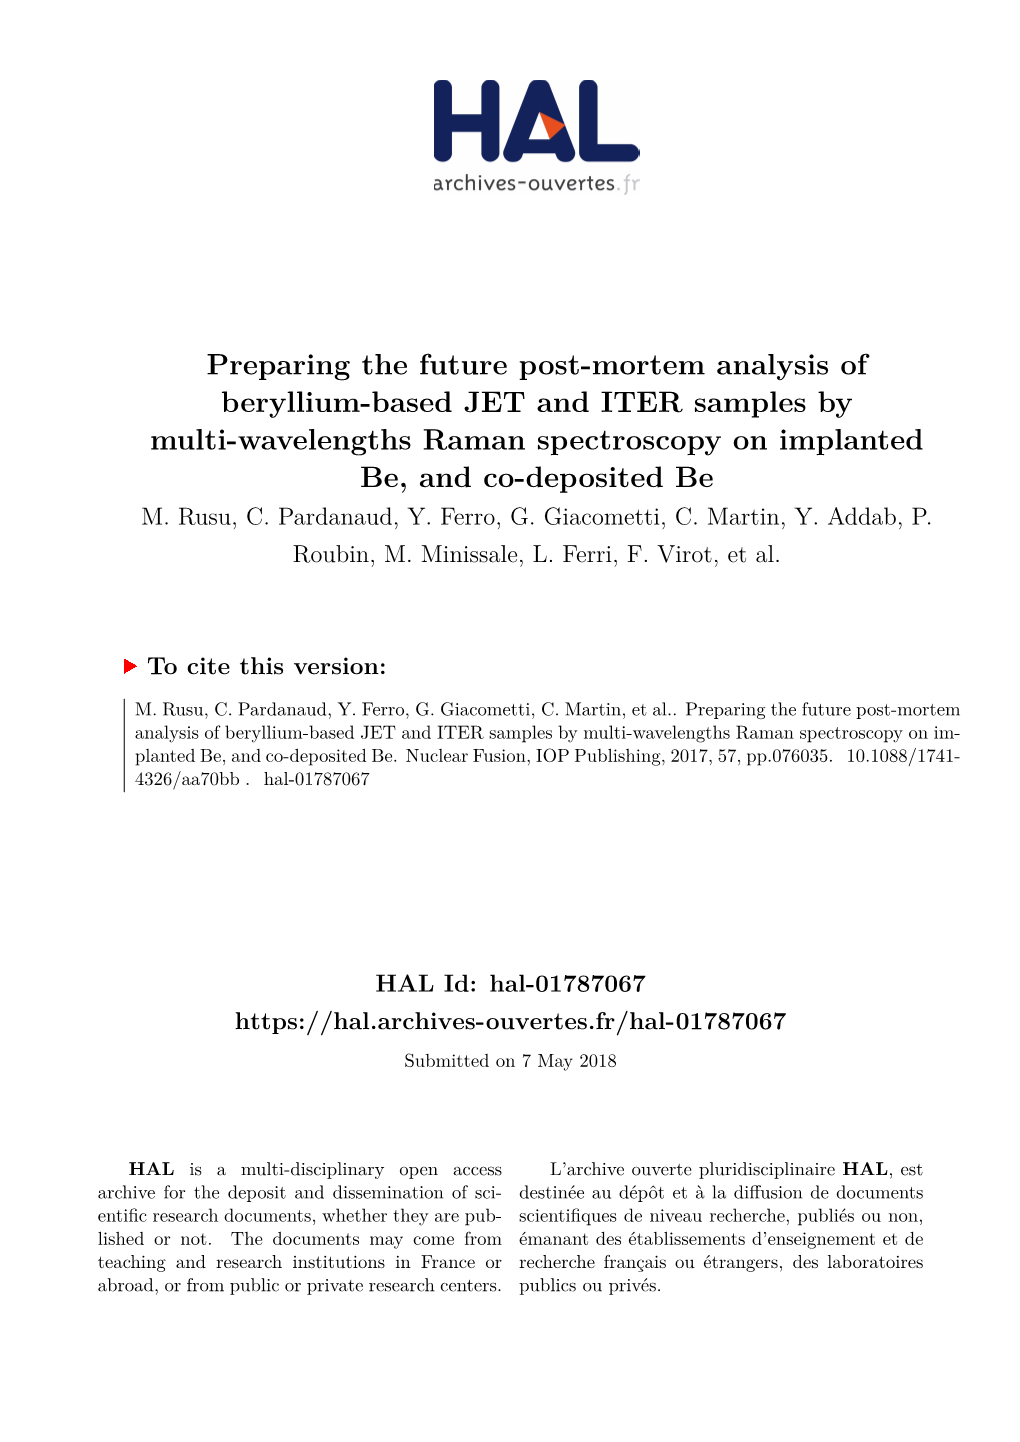 Preparing the Future Post-Mortem Analysis of Beryllium-Based JET and ITER Samples by Multi-Wavelengths Raman Spectroscopy on Implanted Be, and Co-Deposited Be M